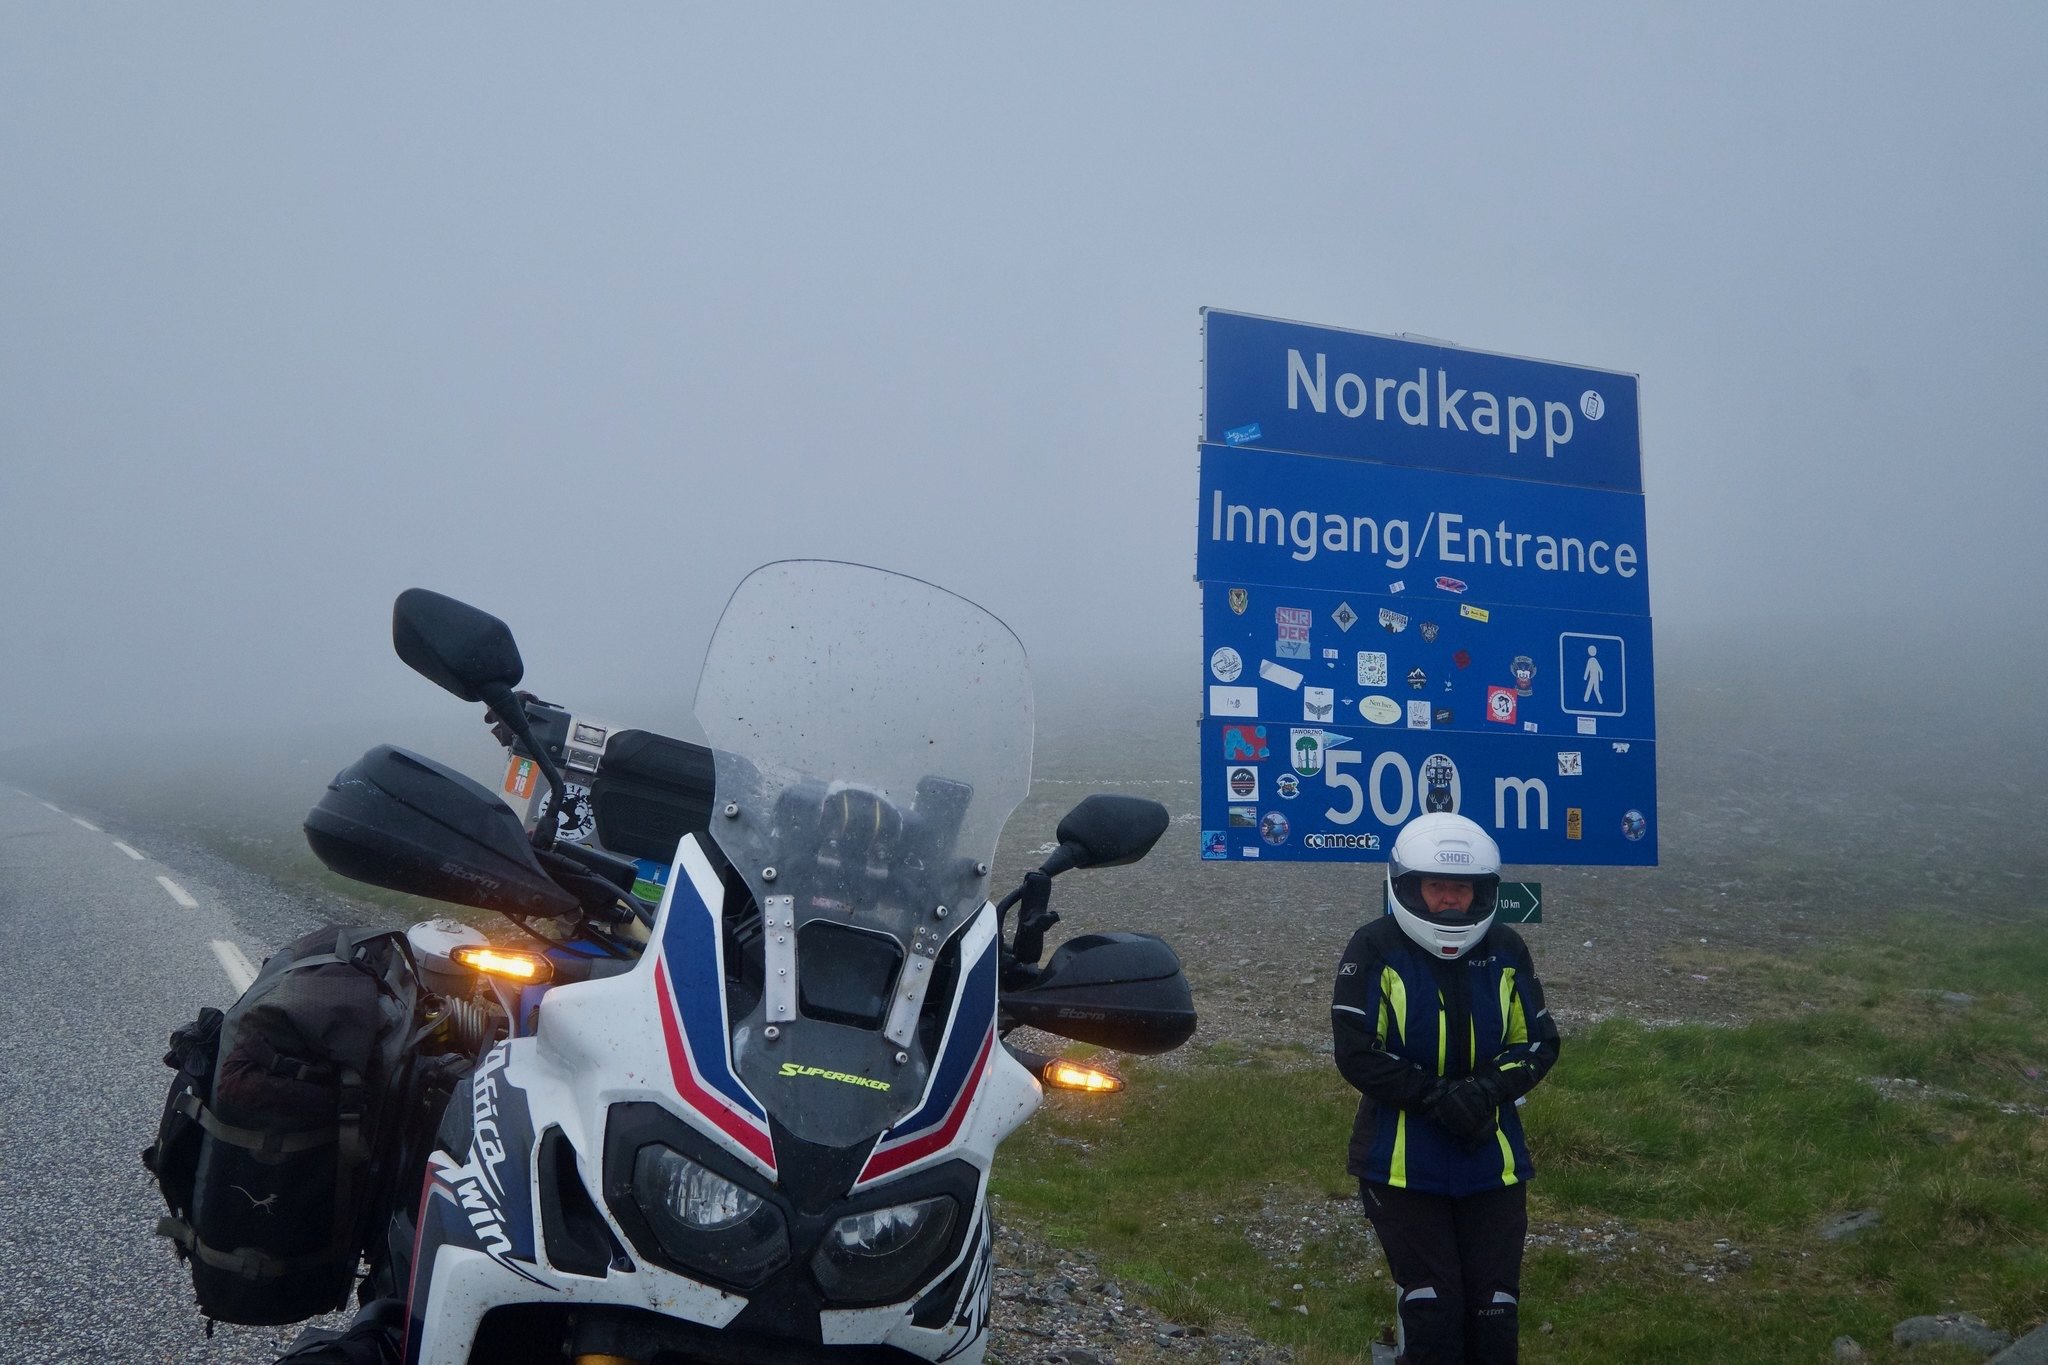  Cold at Nordkapp. Graeme and Katrina visited there before in 2002 on a sunny day when they travelled up there with their two sons in a clapped out old Peugeot and pop top camper. 